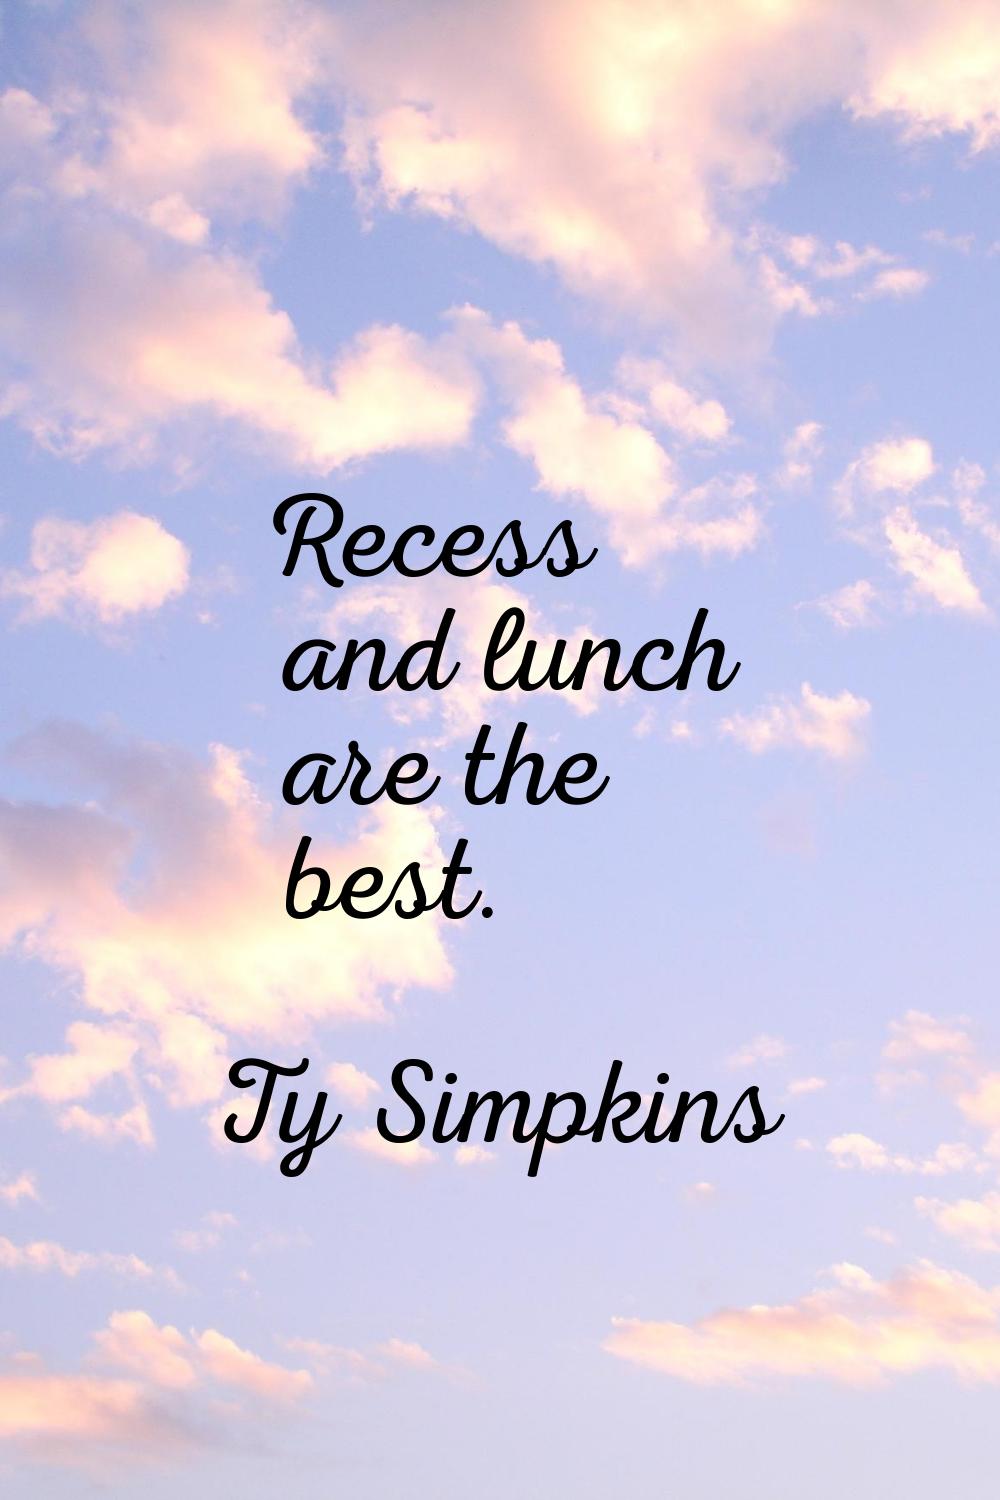 Recess and lunch are the best.